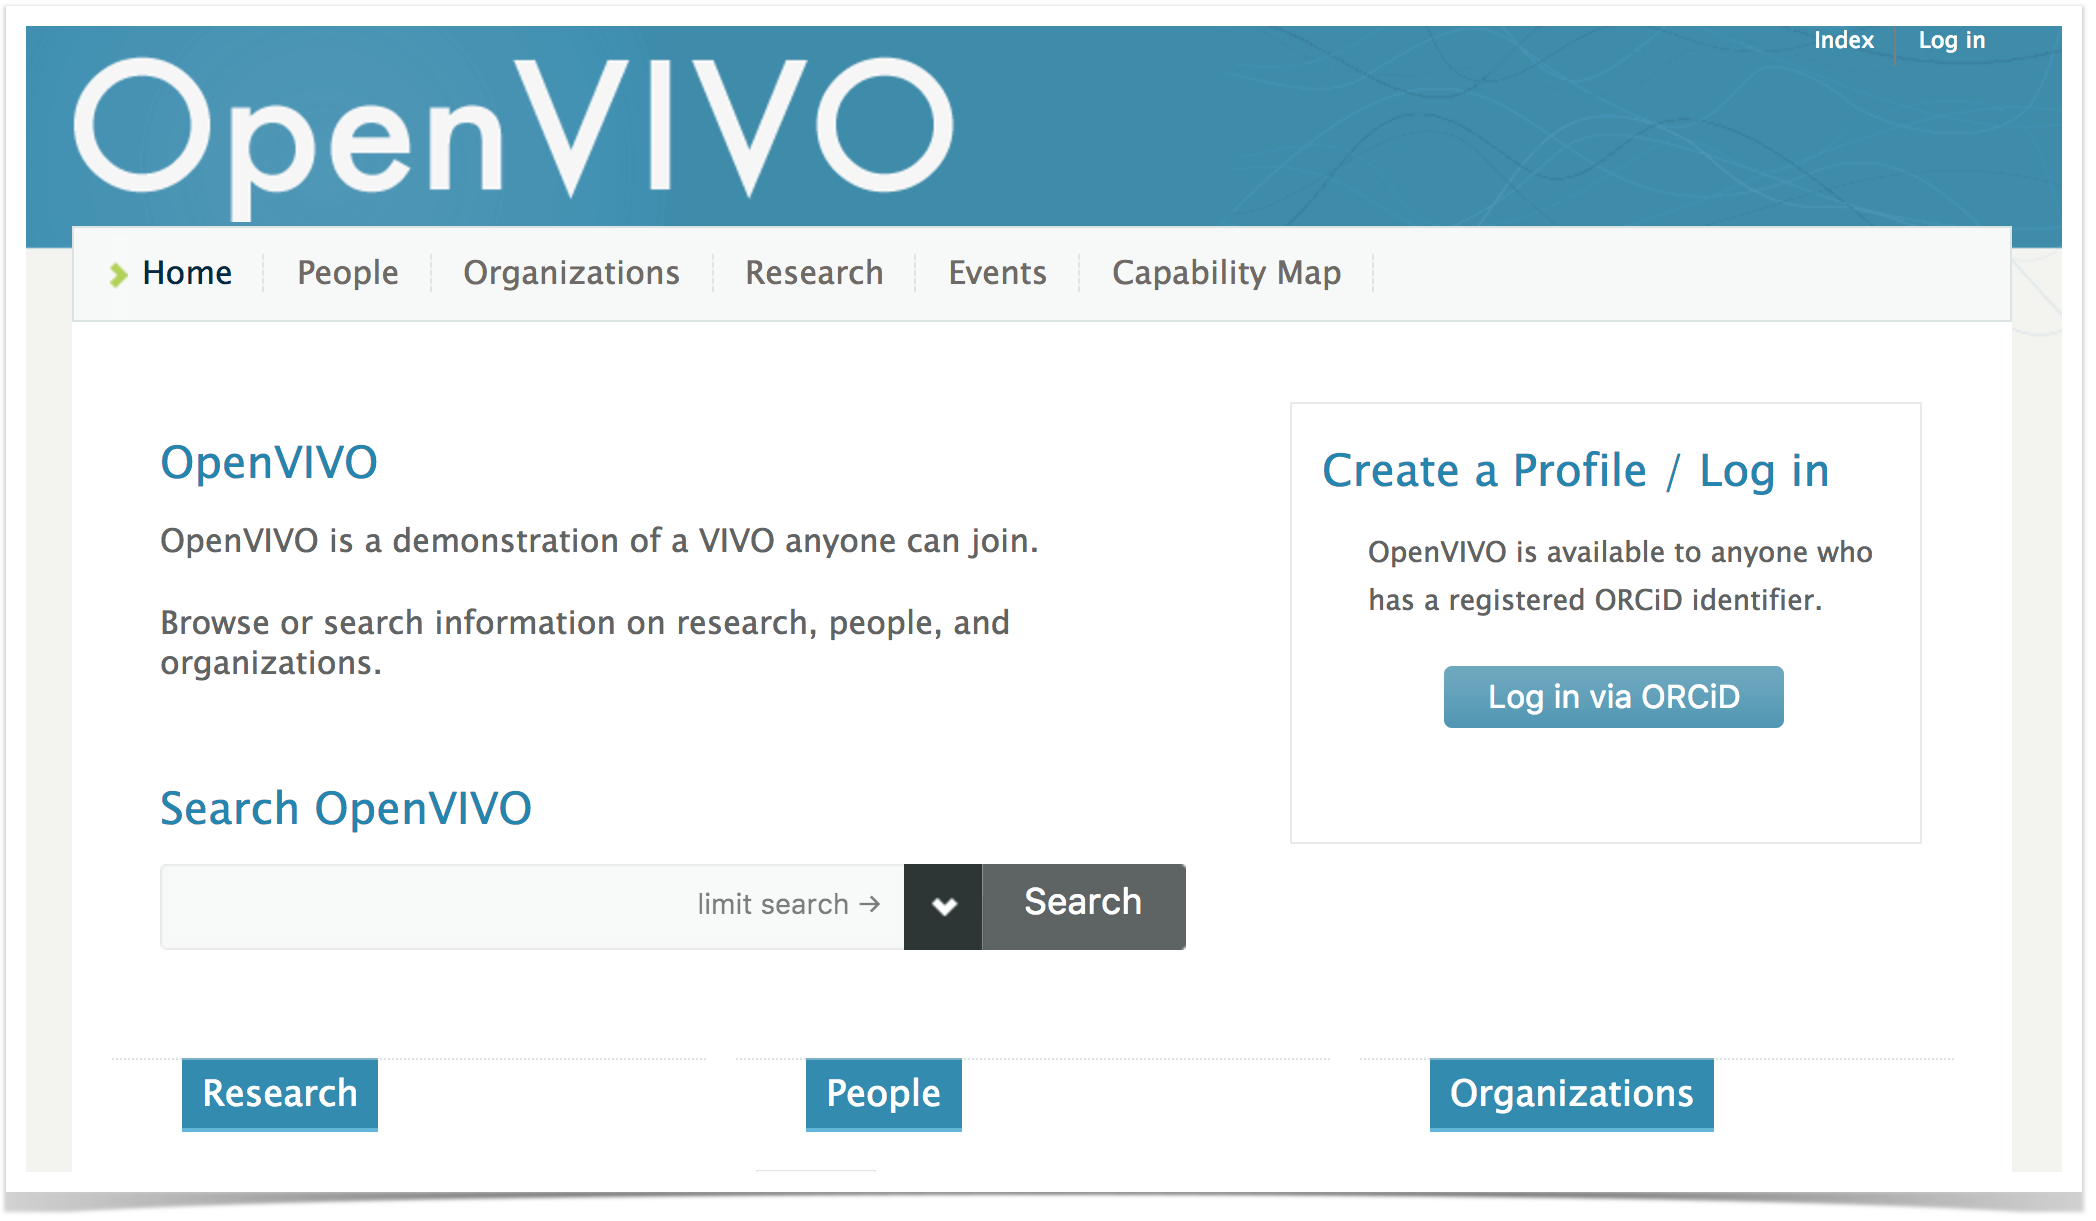 Click on Capability Map on the VIVO home page